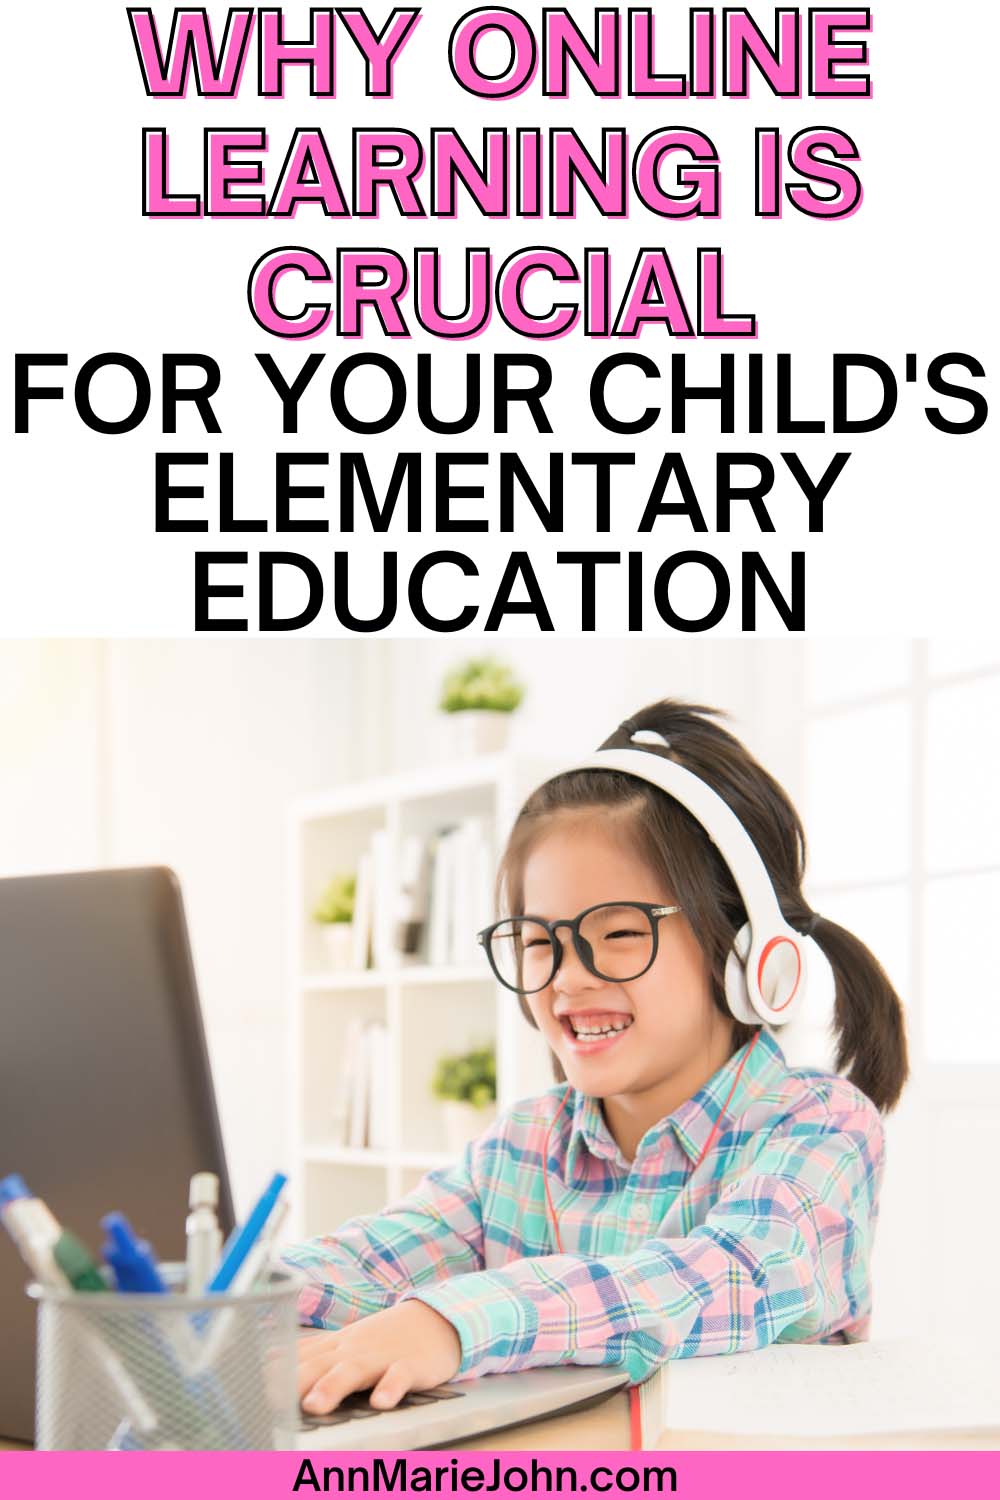 Why Online Learning is Crucial for Your Child's Elementary Education